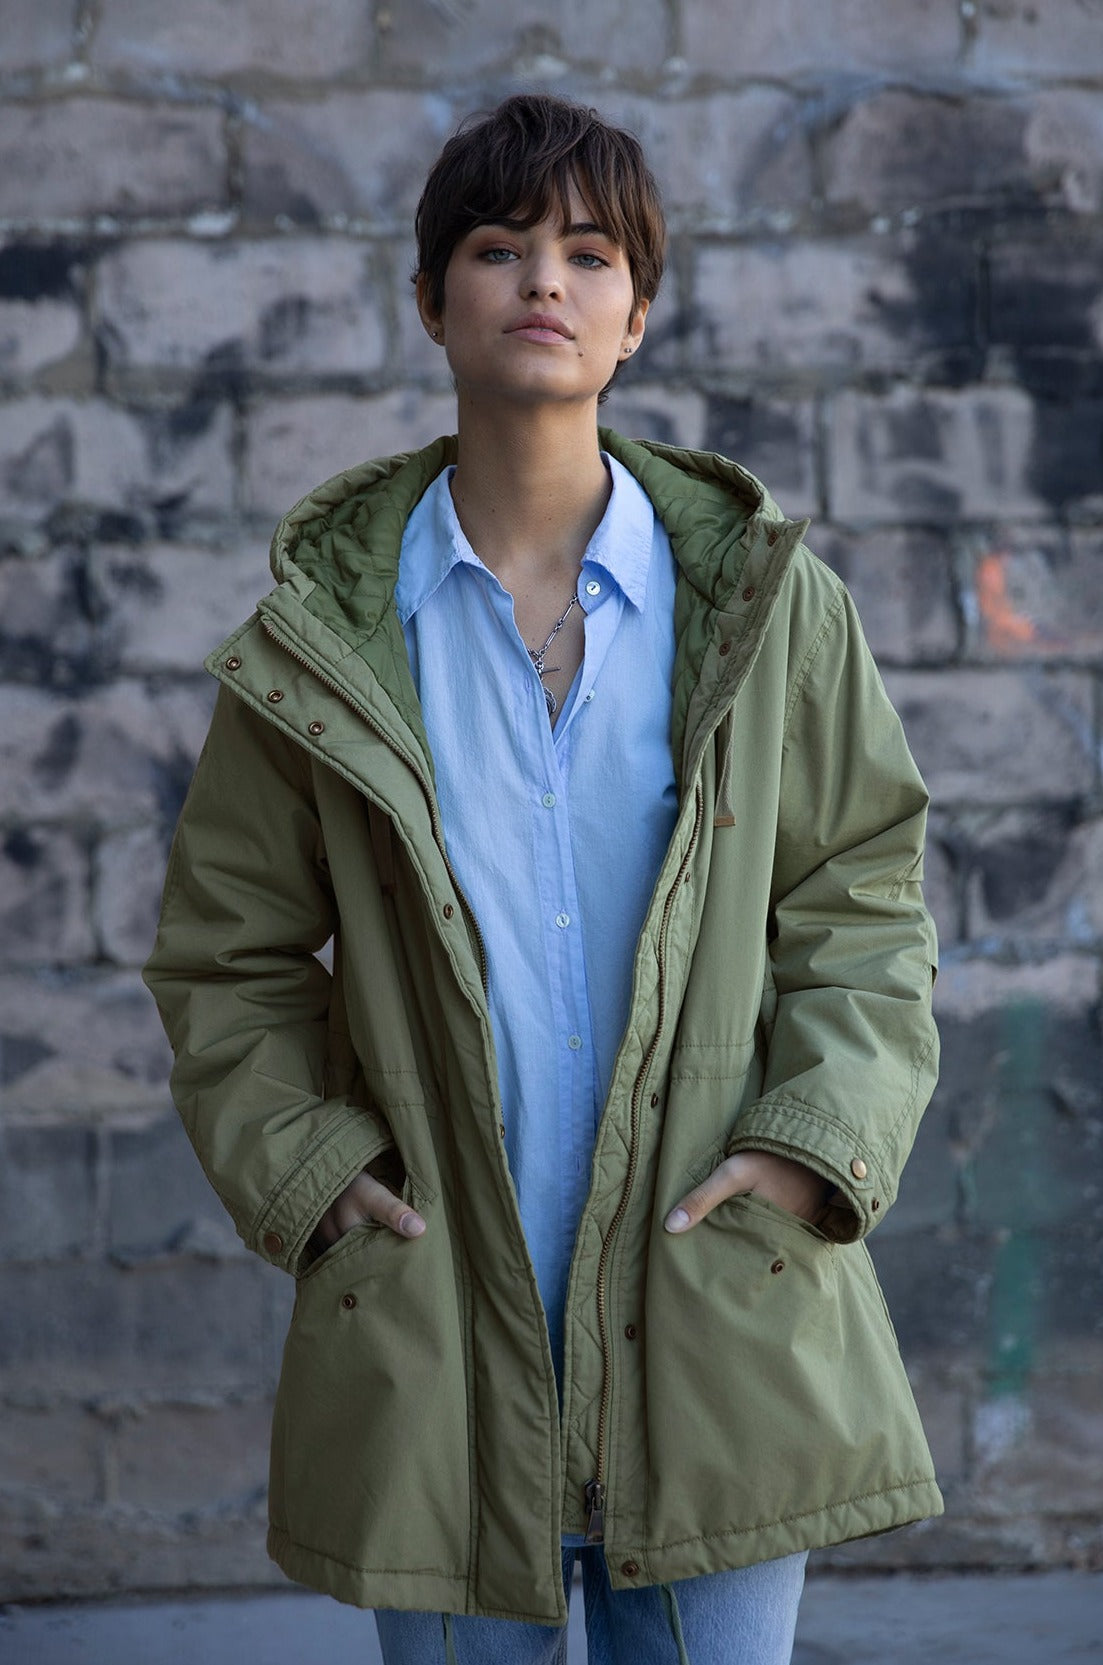 Cheviot Jacket in evergreen layered over Redondo shirt in mist blue front model hands in pockets.-25315857236161